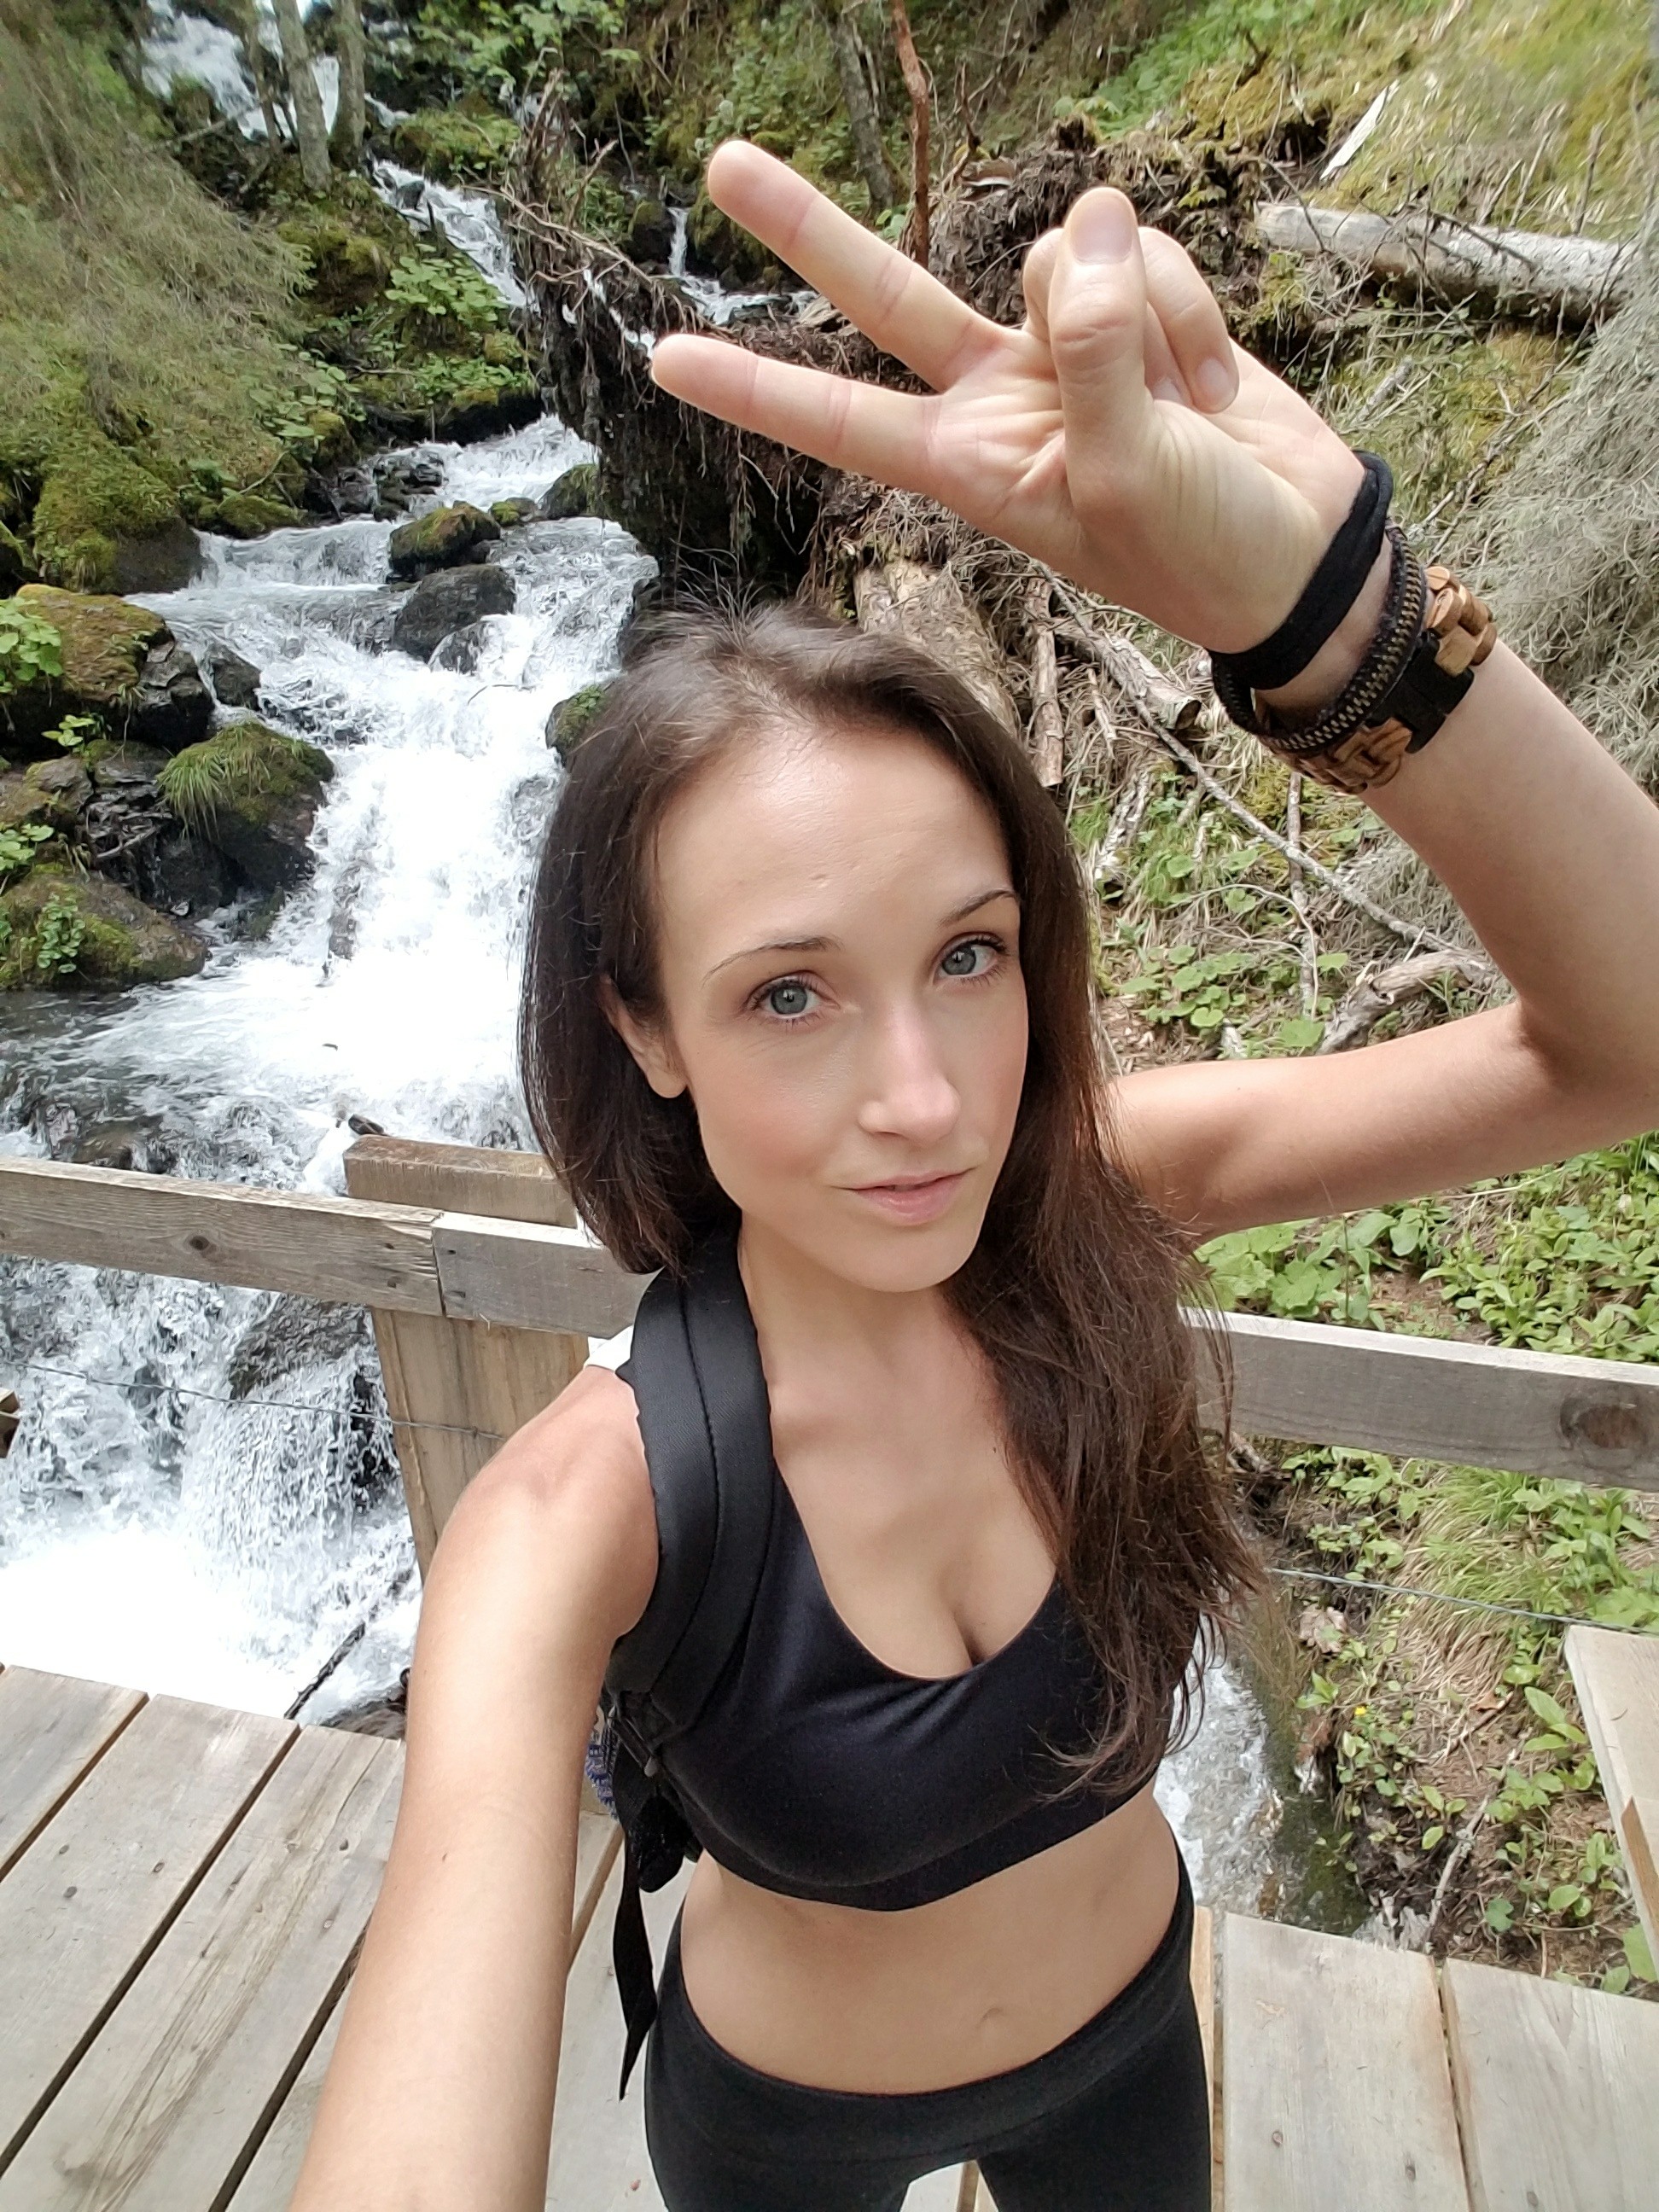 Woman hiking by a waterfall and giving a peace sign